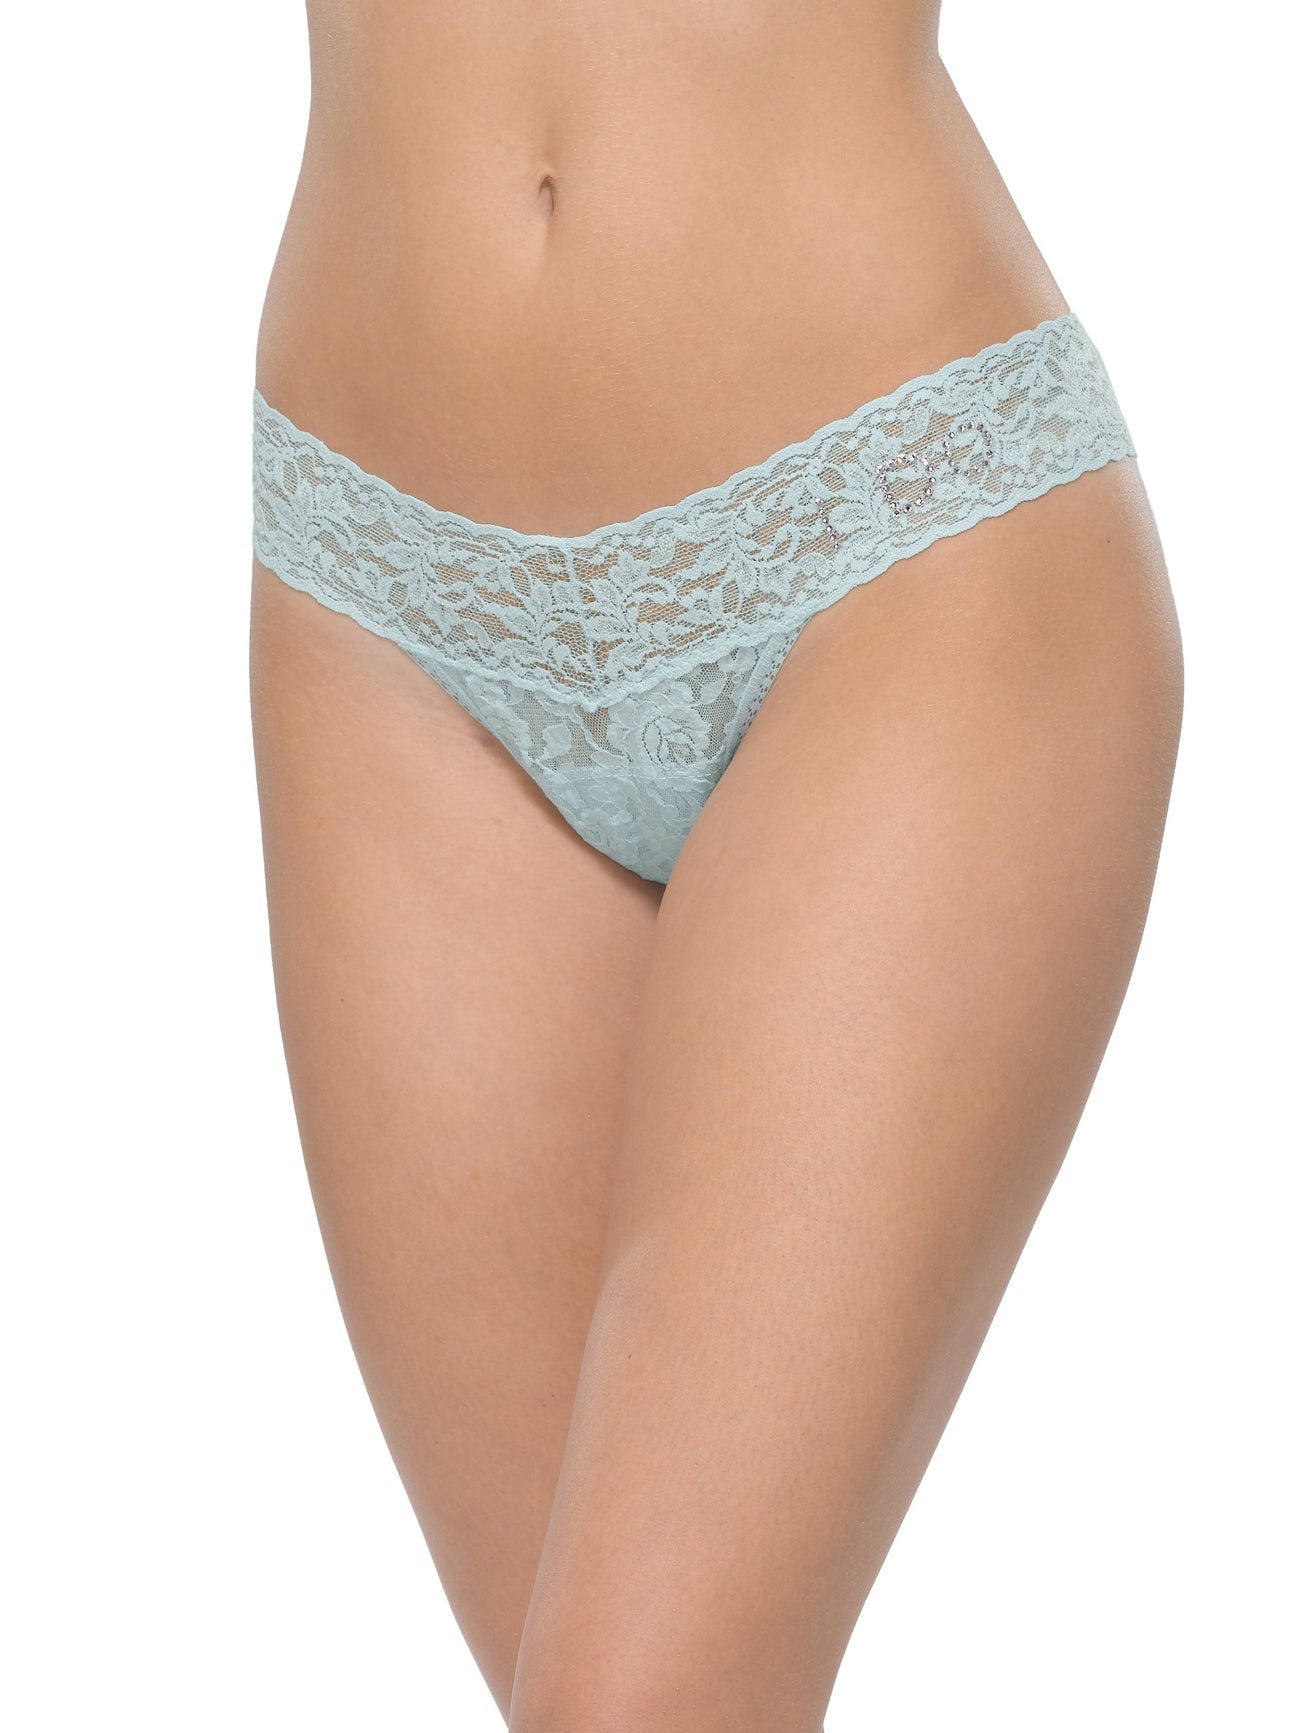 https://inthemoodintimates.com/cdn/shop/products/Hanky-Panky-I-Do-Crystal-Signature-Lace-Low-Rise-Thong-View-3_1300x_ce464cde-84f1-4805-a5ca-bdb6ad5ec6e1.jpg?v=1654542959